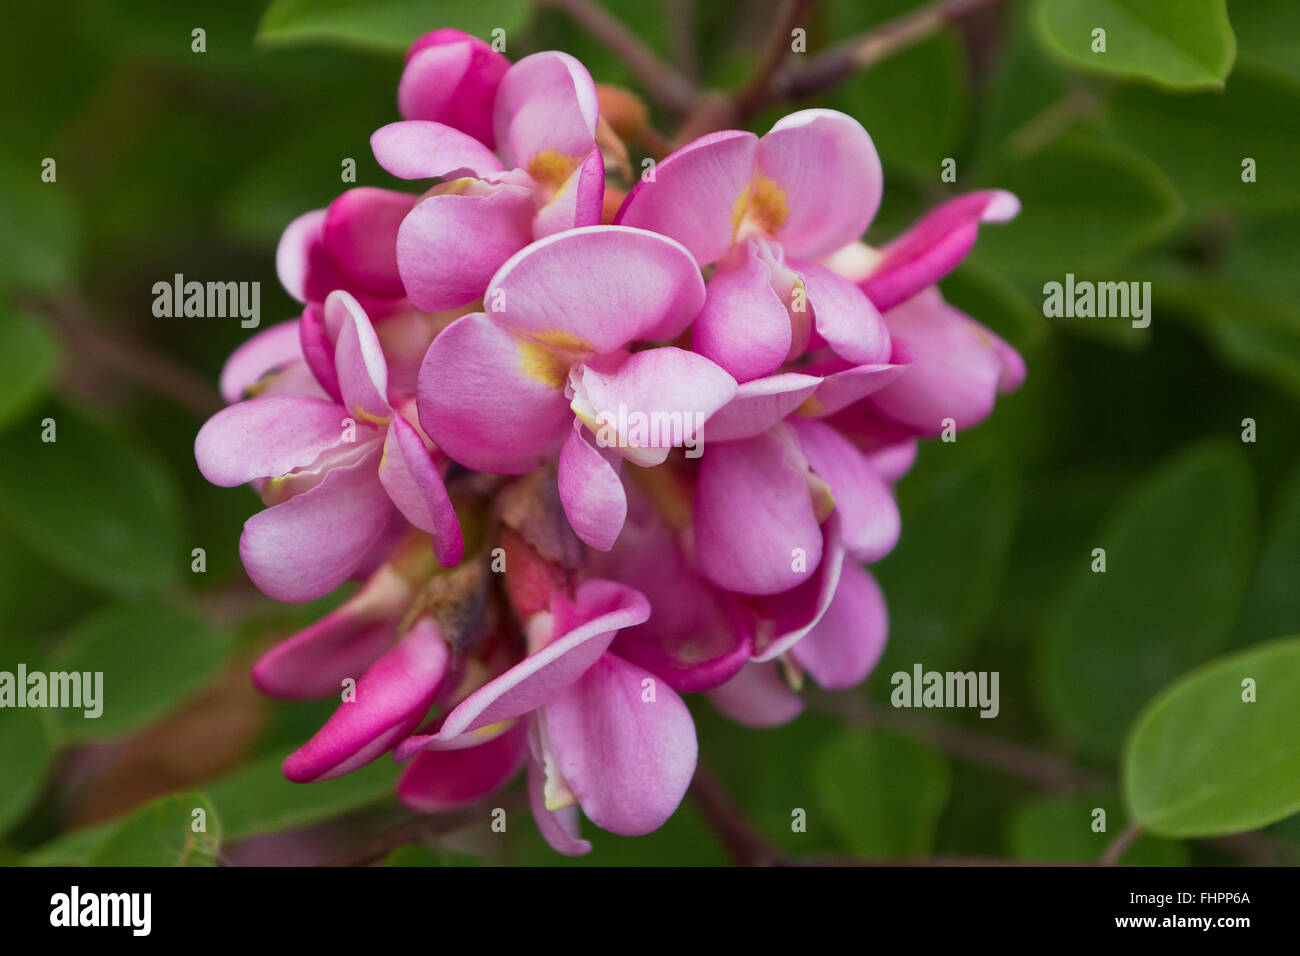 Closeup view of a bunch of Bristly Locust flowers ( Robinia hispida). Other names: Rose Acacia, Moss Locust. Stock Photo